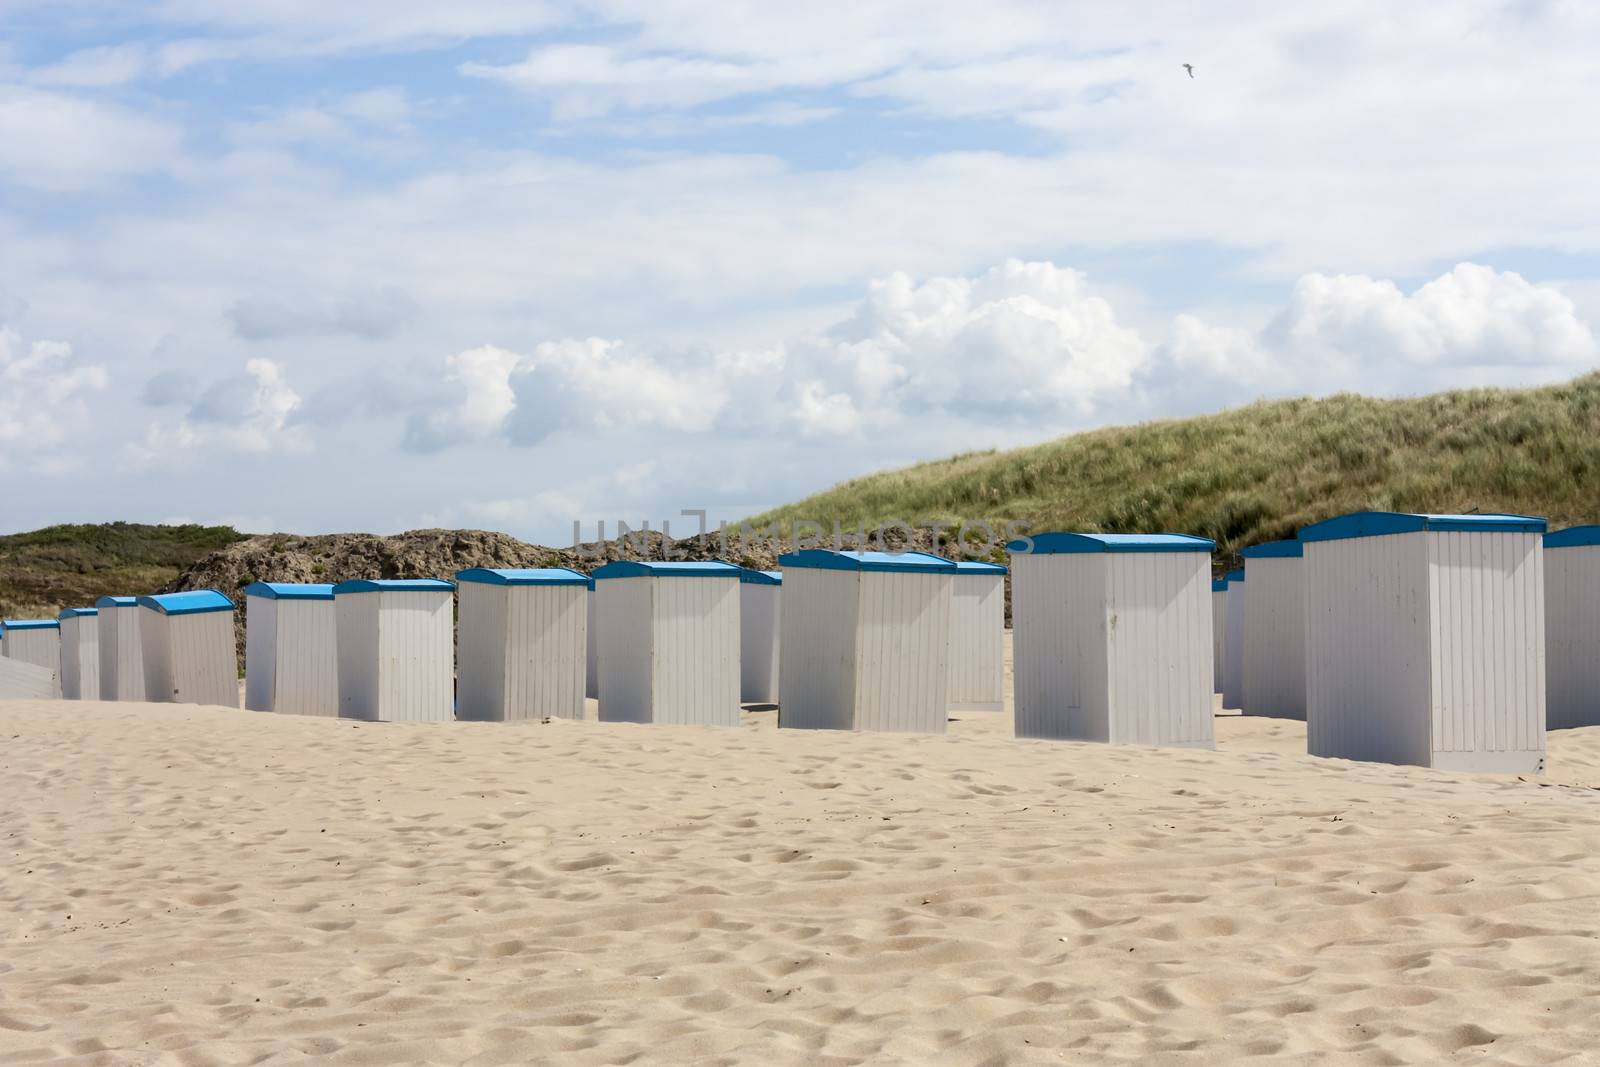 Beach huts along the North Sea in the Netherlands by Tetyana